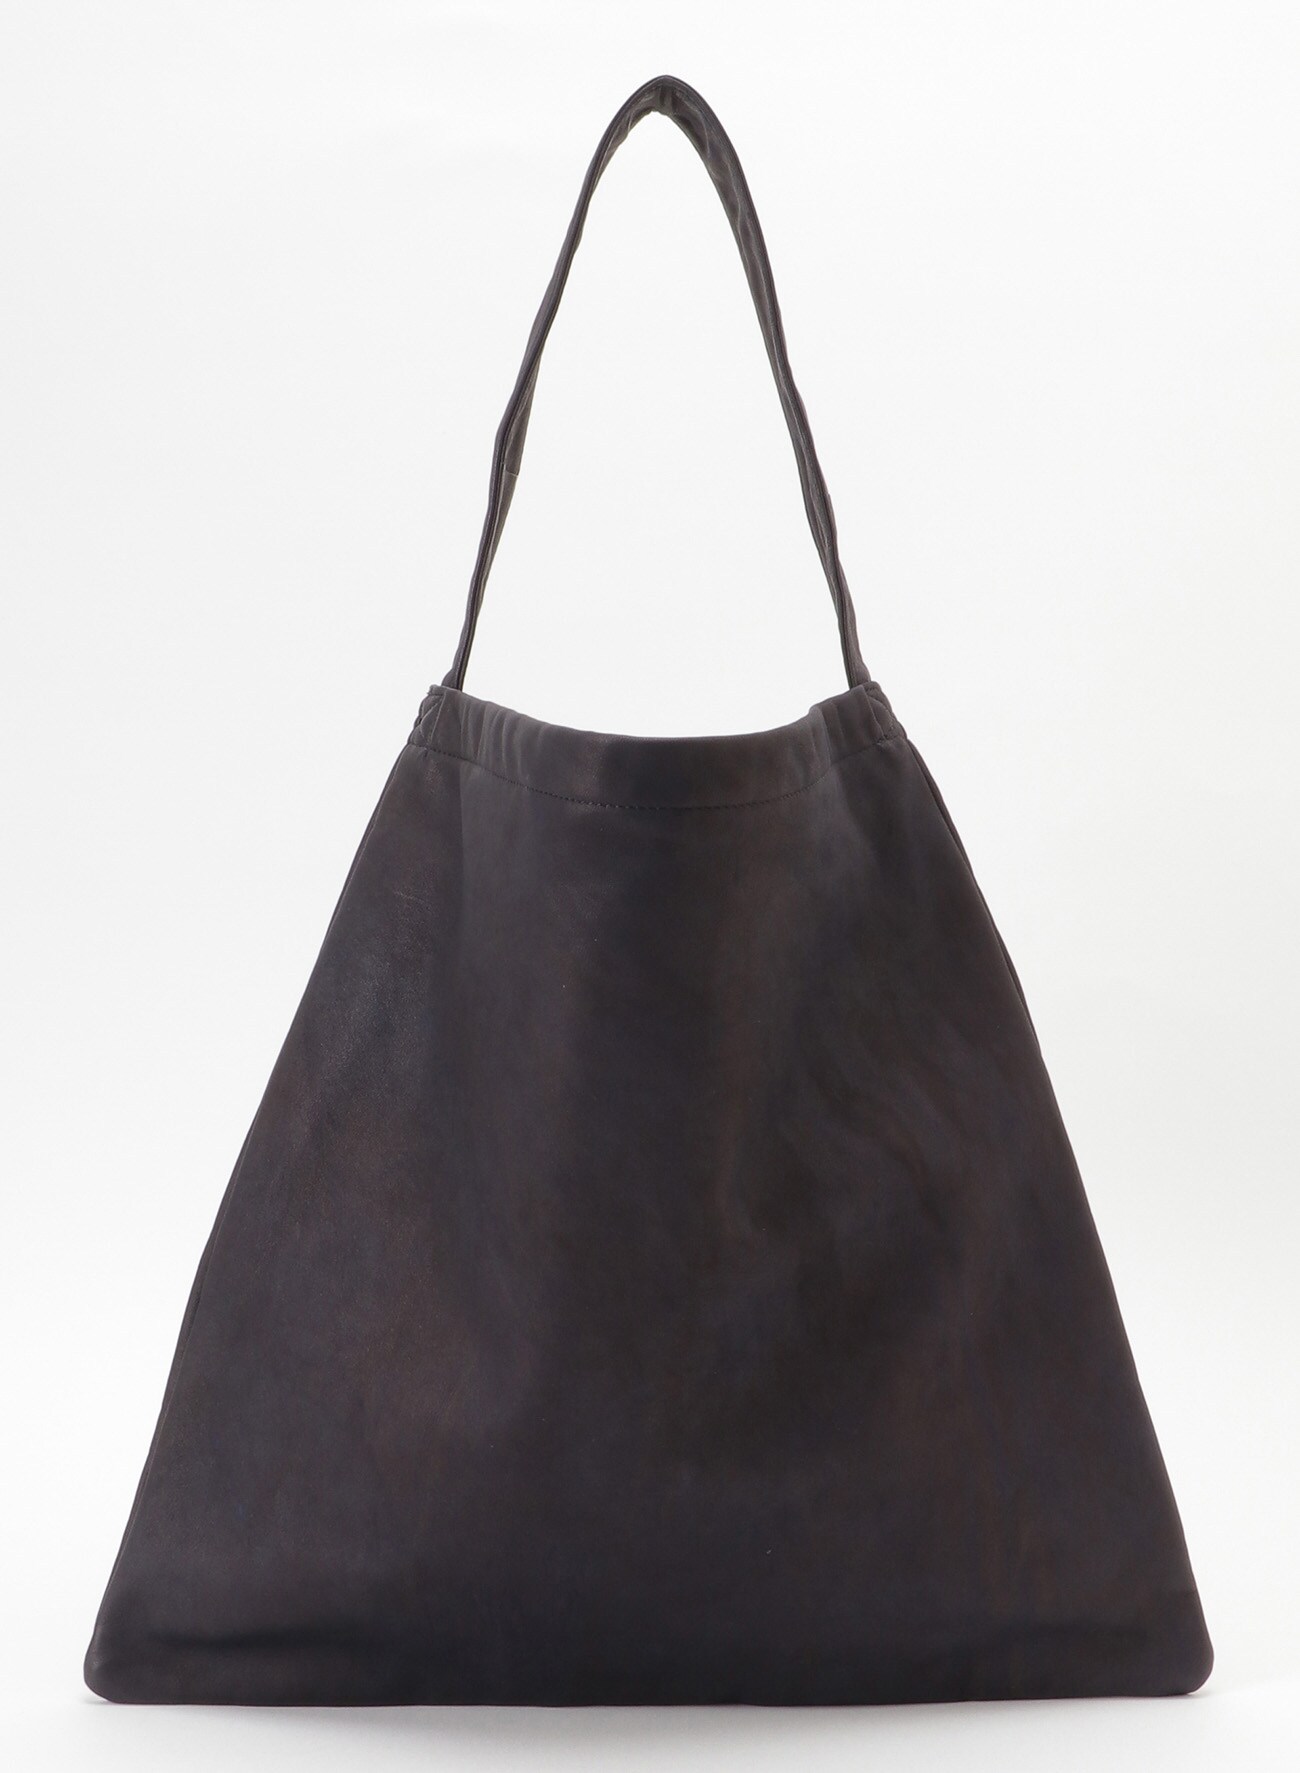 TIE-DYED LEATHER FLAT TOTE BAG